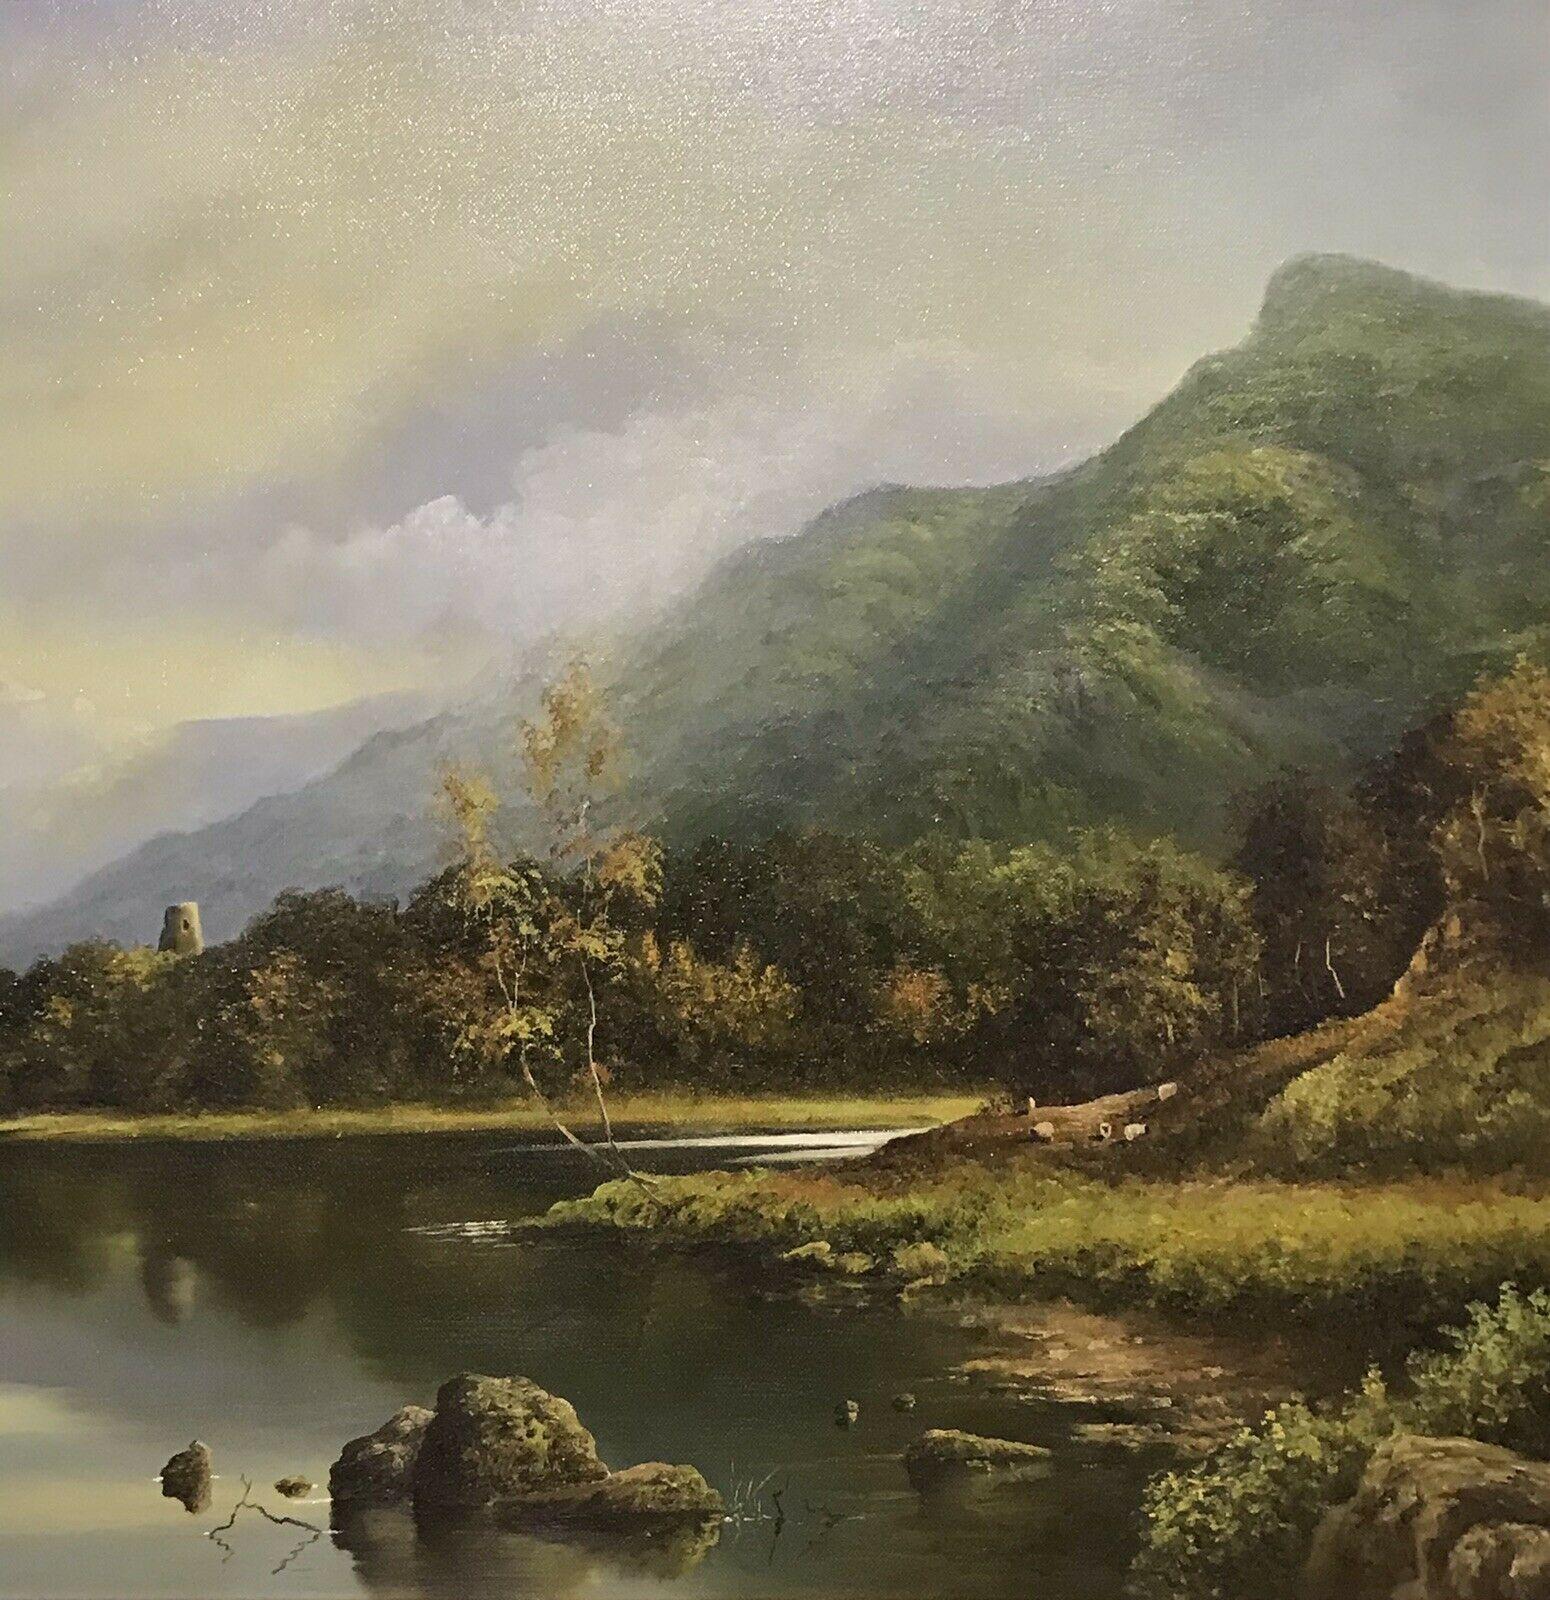 a tranquil lake scene painting